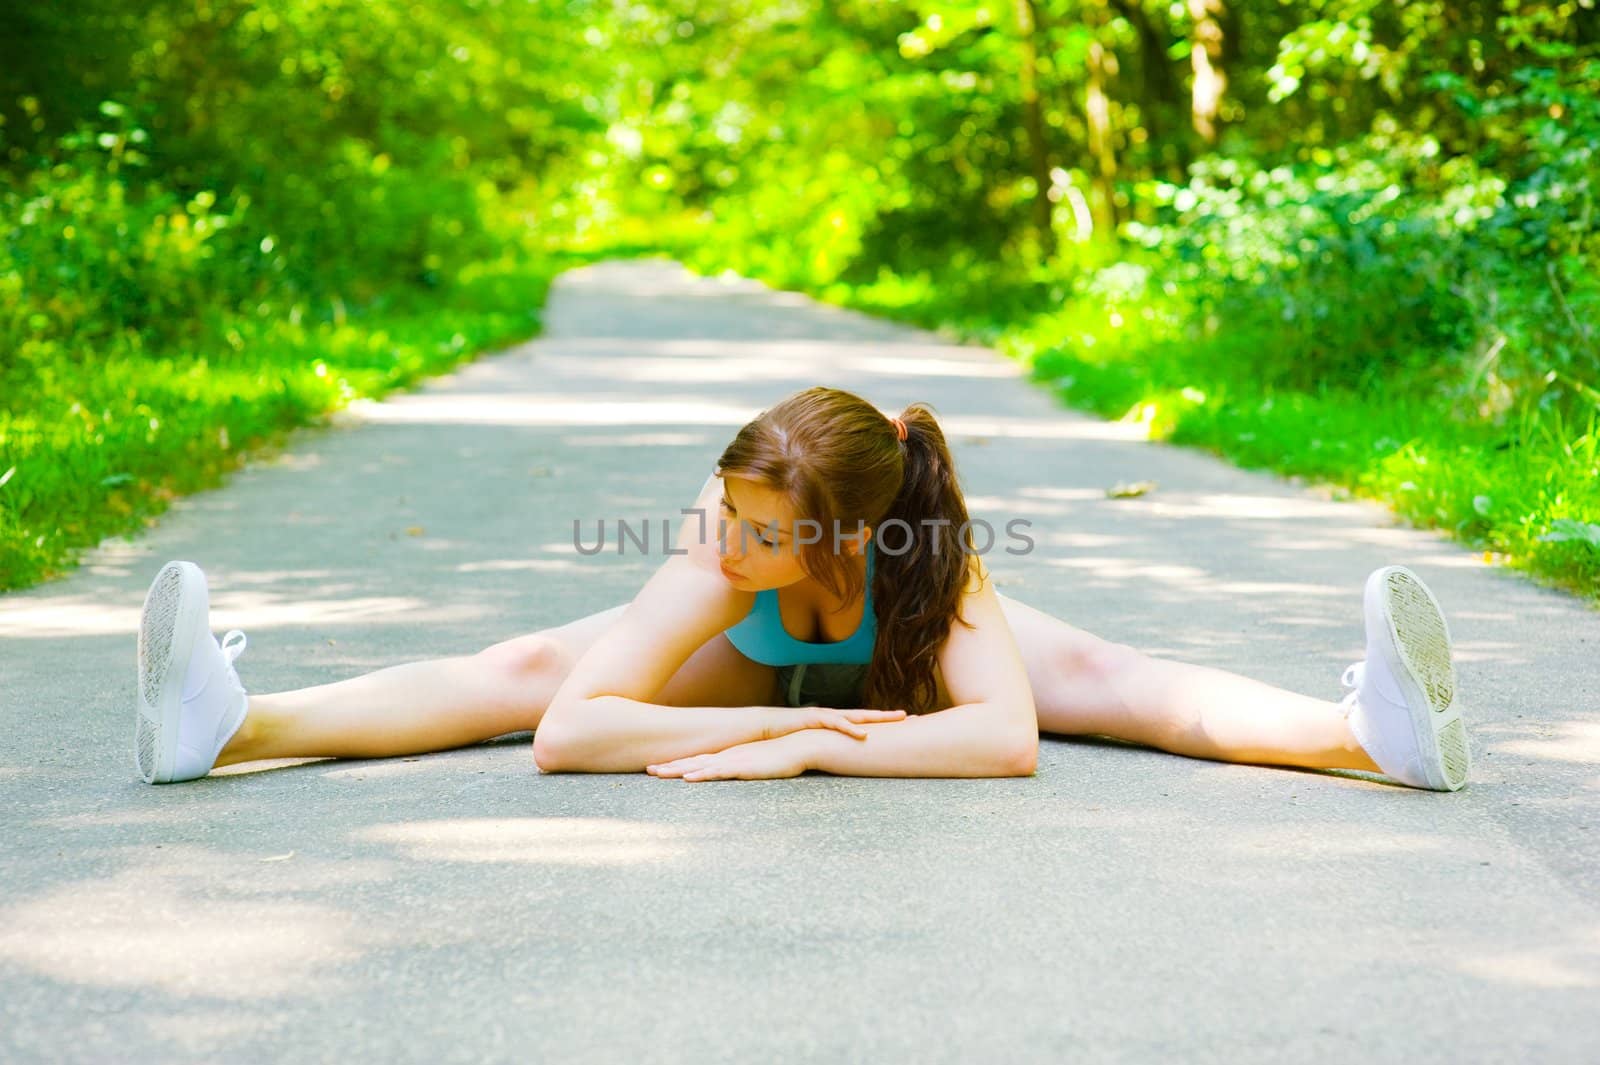 Young woman exercising, from a complete series of photos.